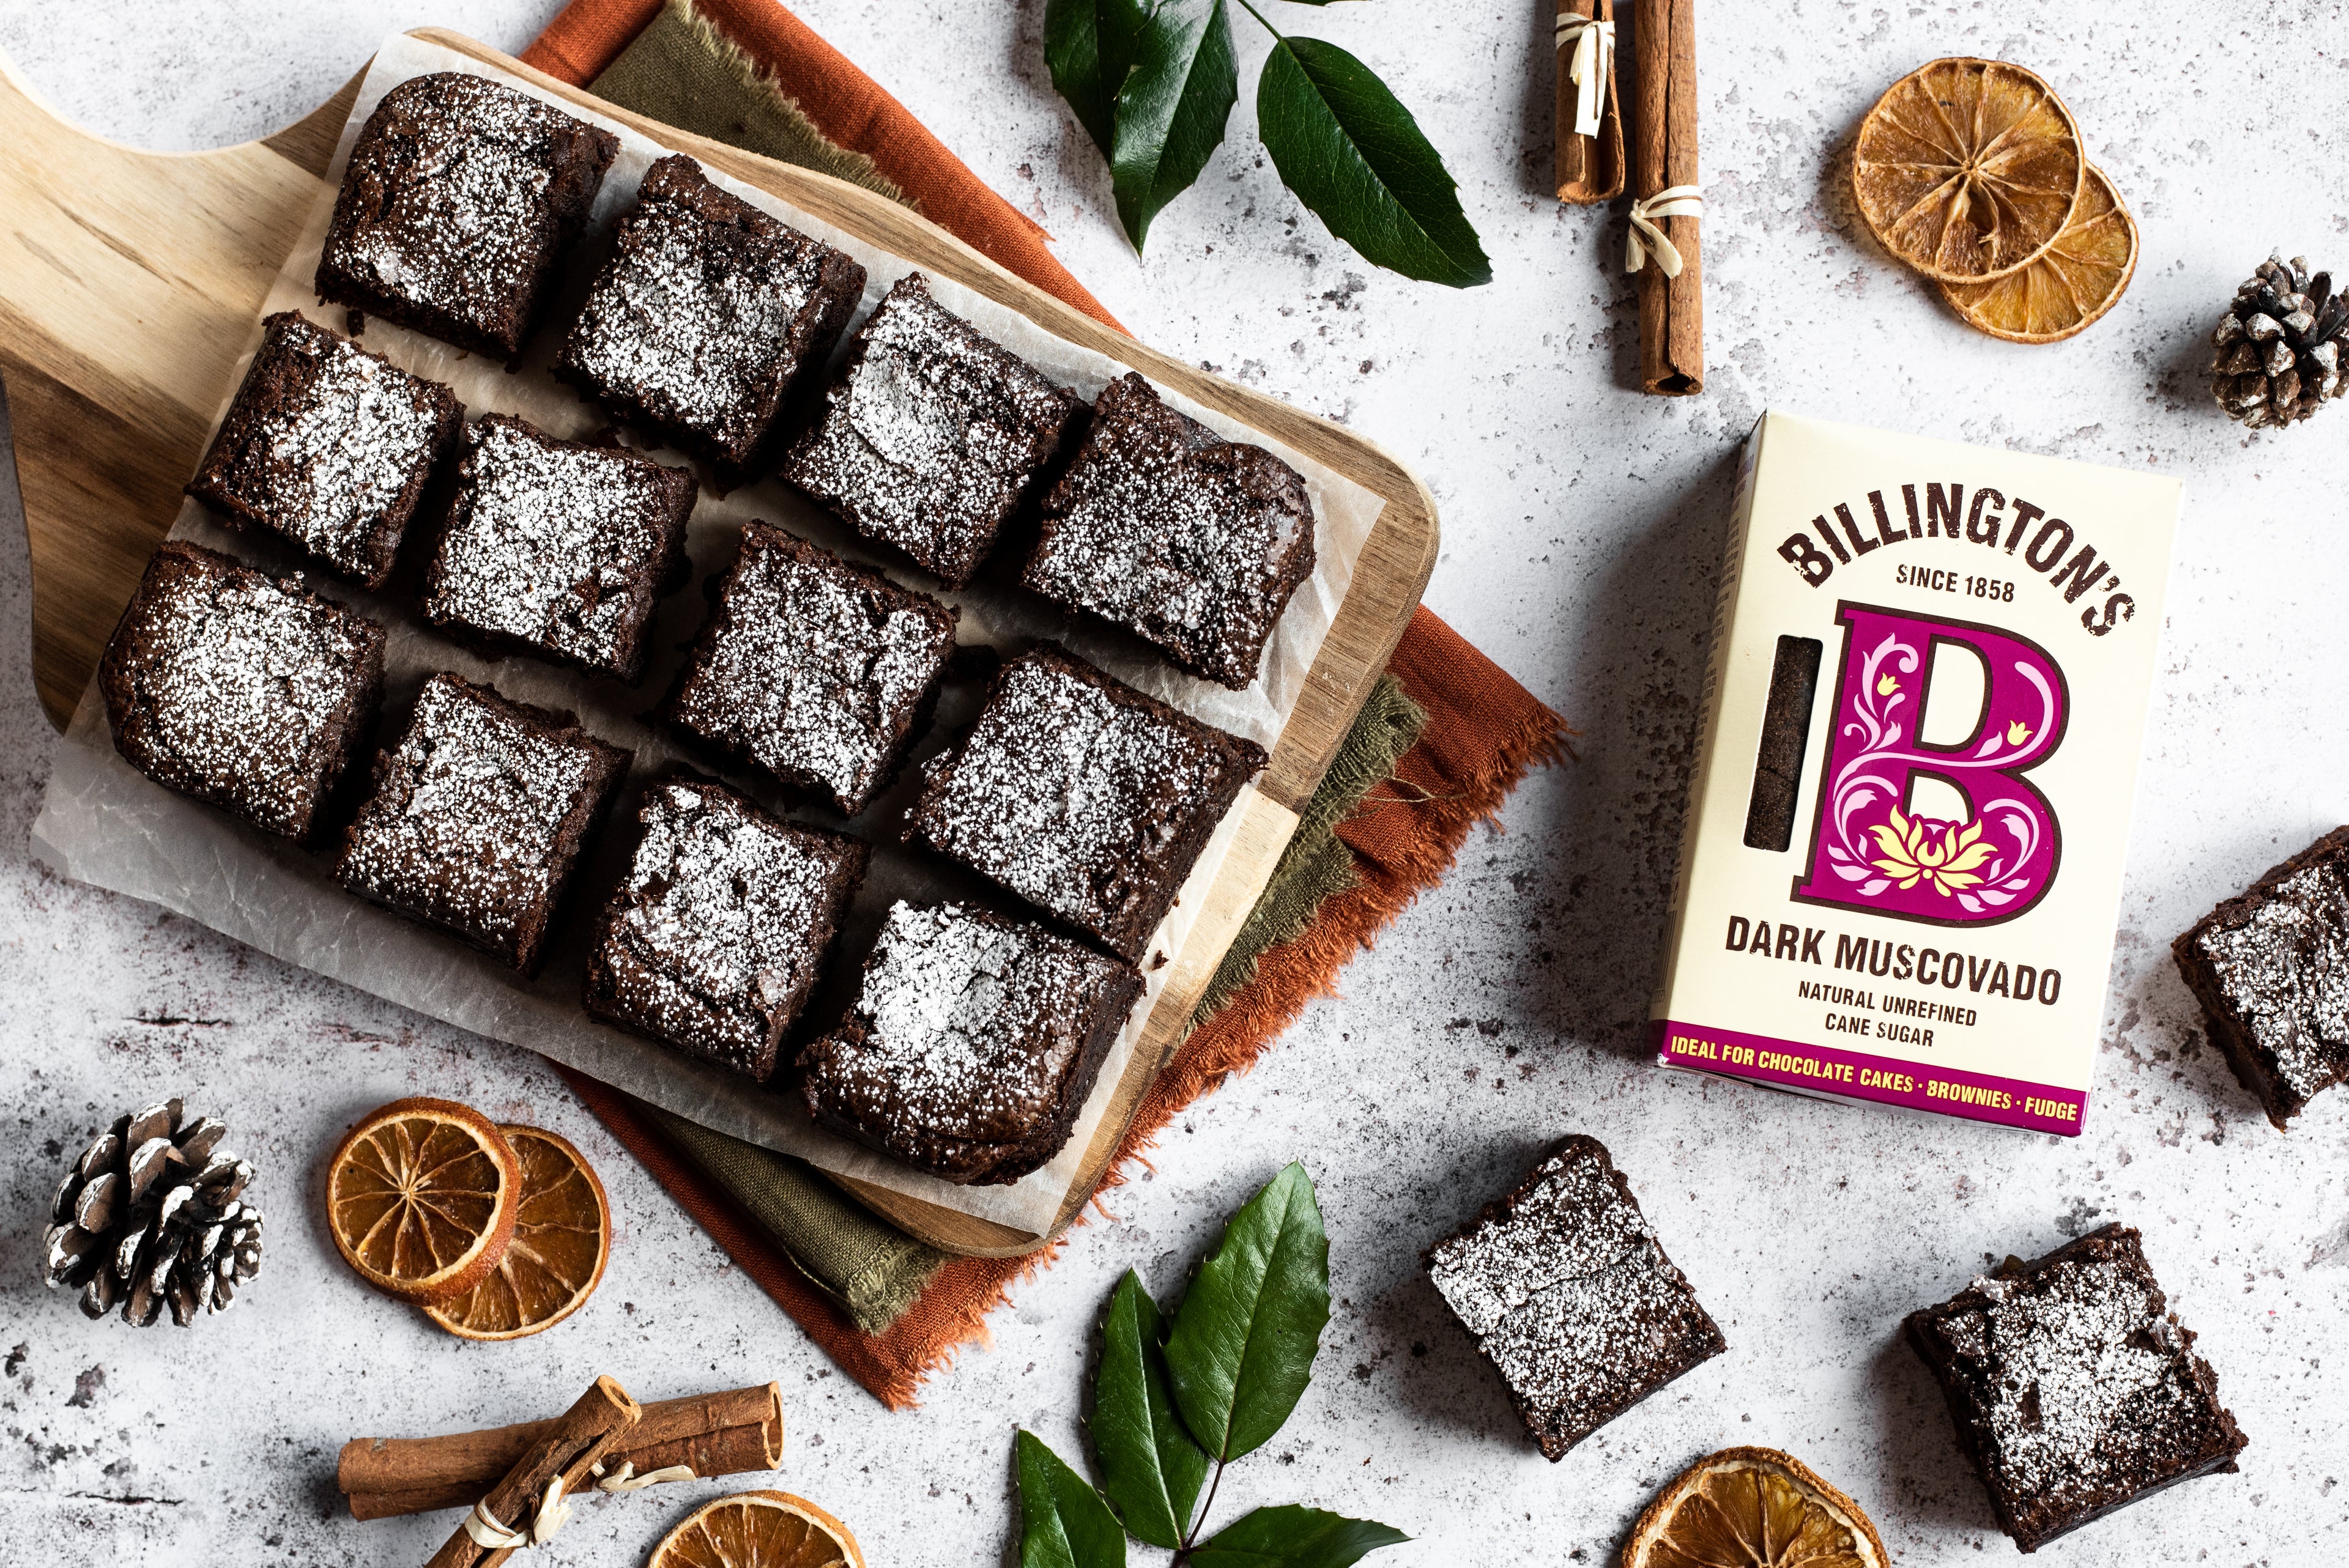 A top down view of 12 chocolate brownies on a board next to a packet of billiontons dark muscovado sugar